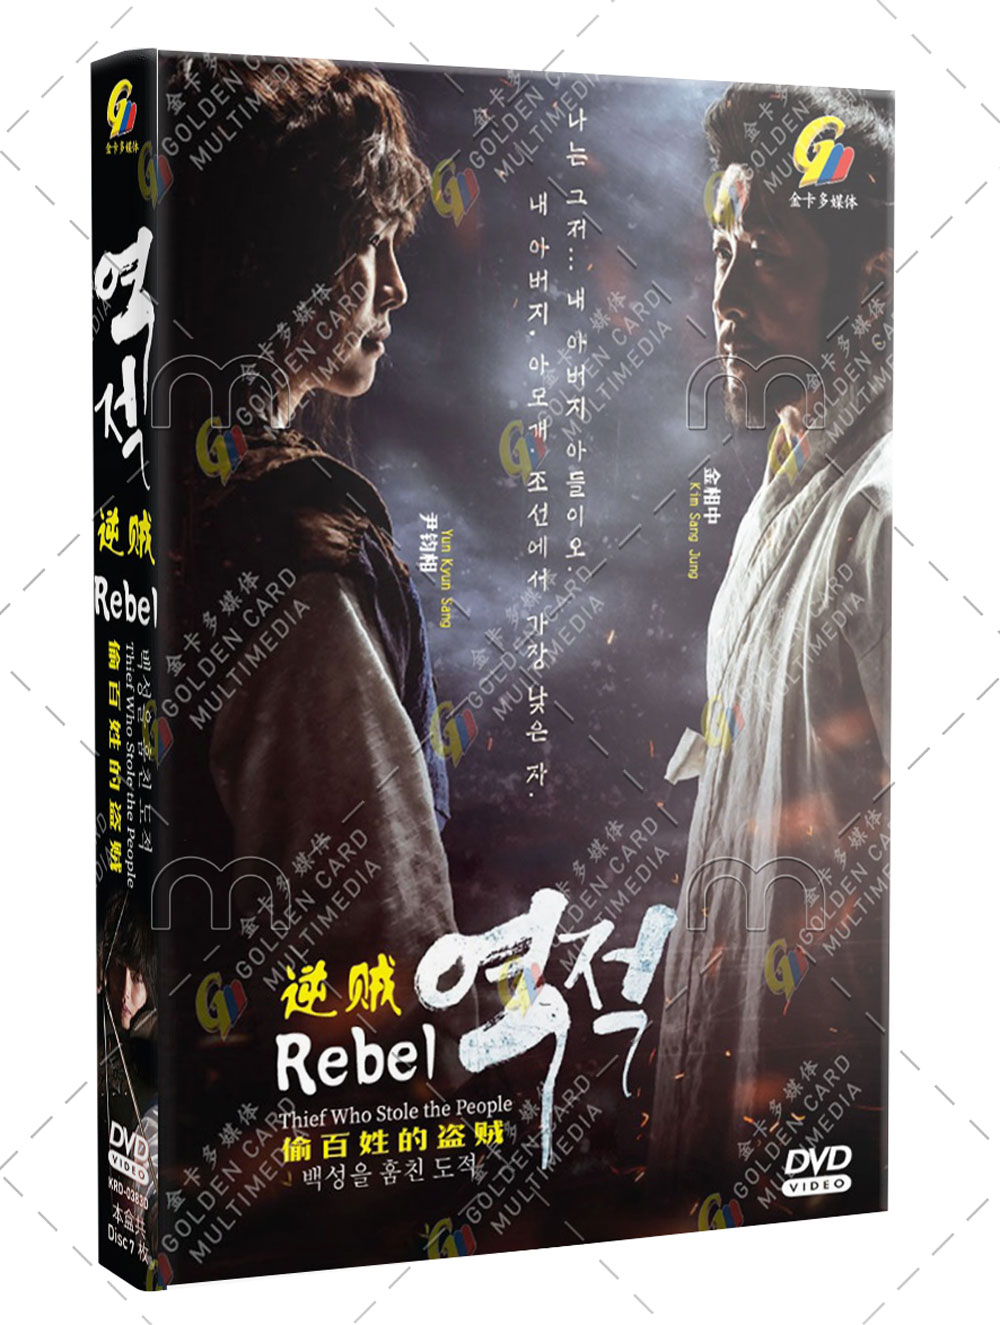 Rebel: Thief Who Stole the People (DVD) (2017) Korean TV Series